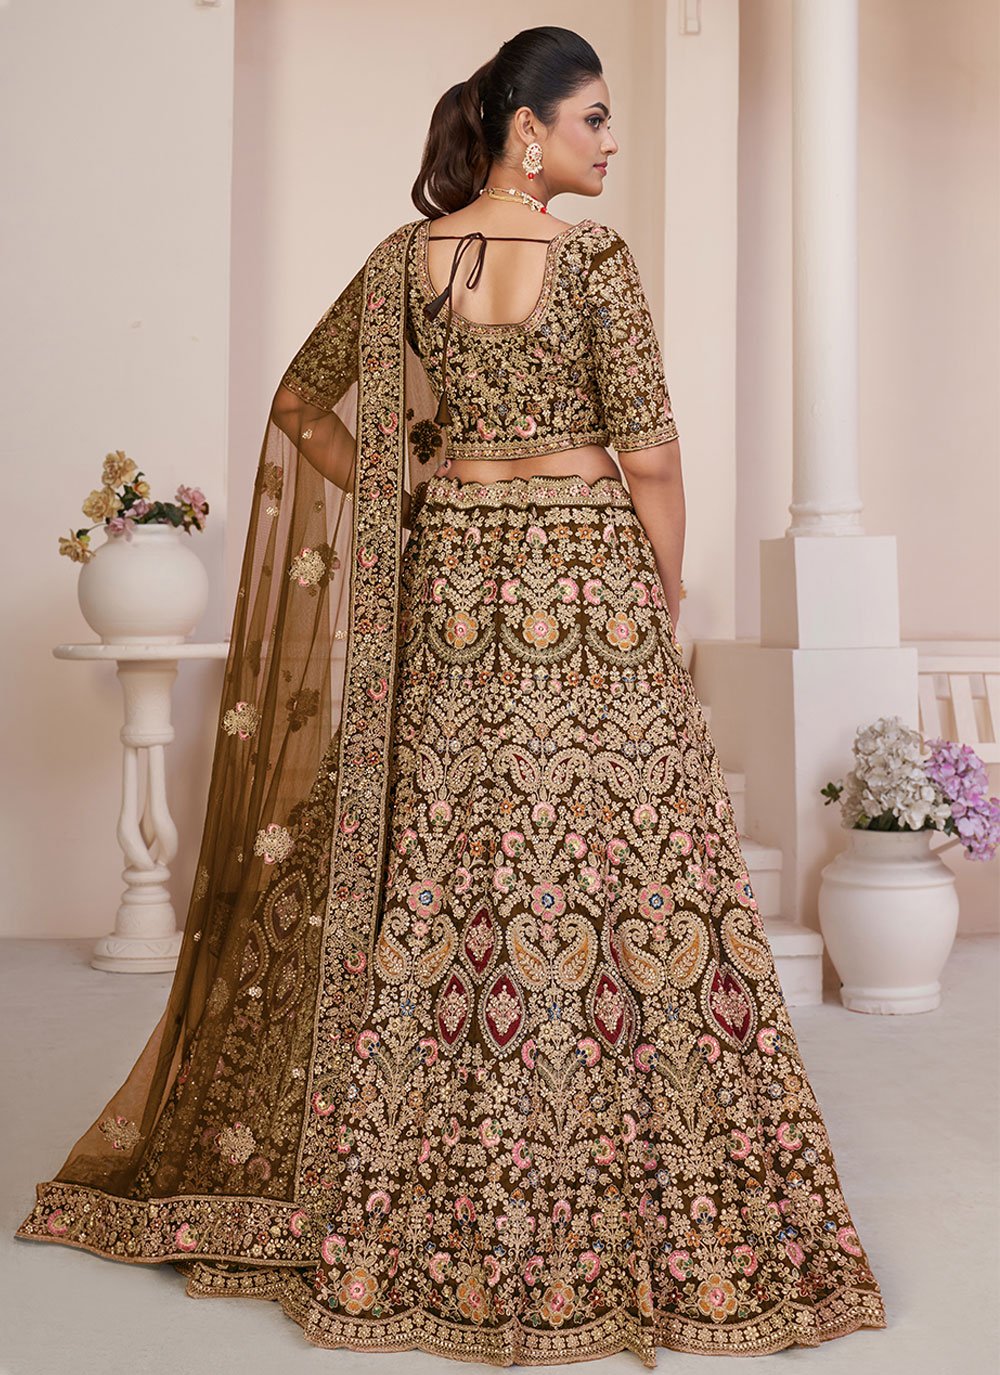 Beige Net Indian Engagement Lehenga With Stone and Sequins Work